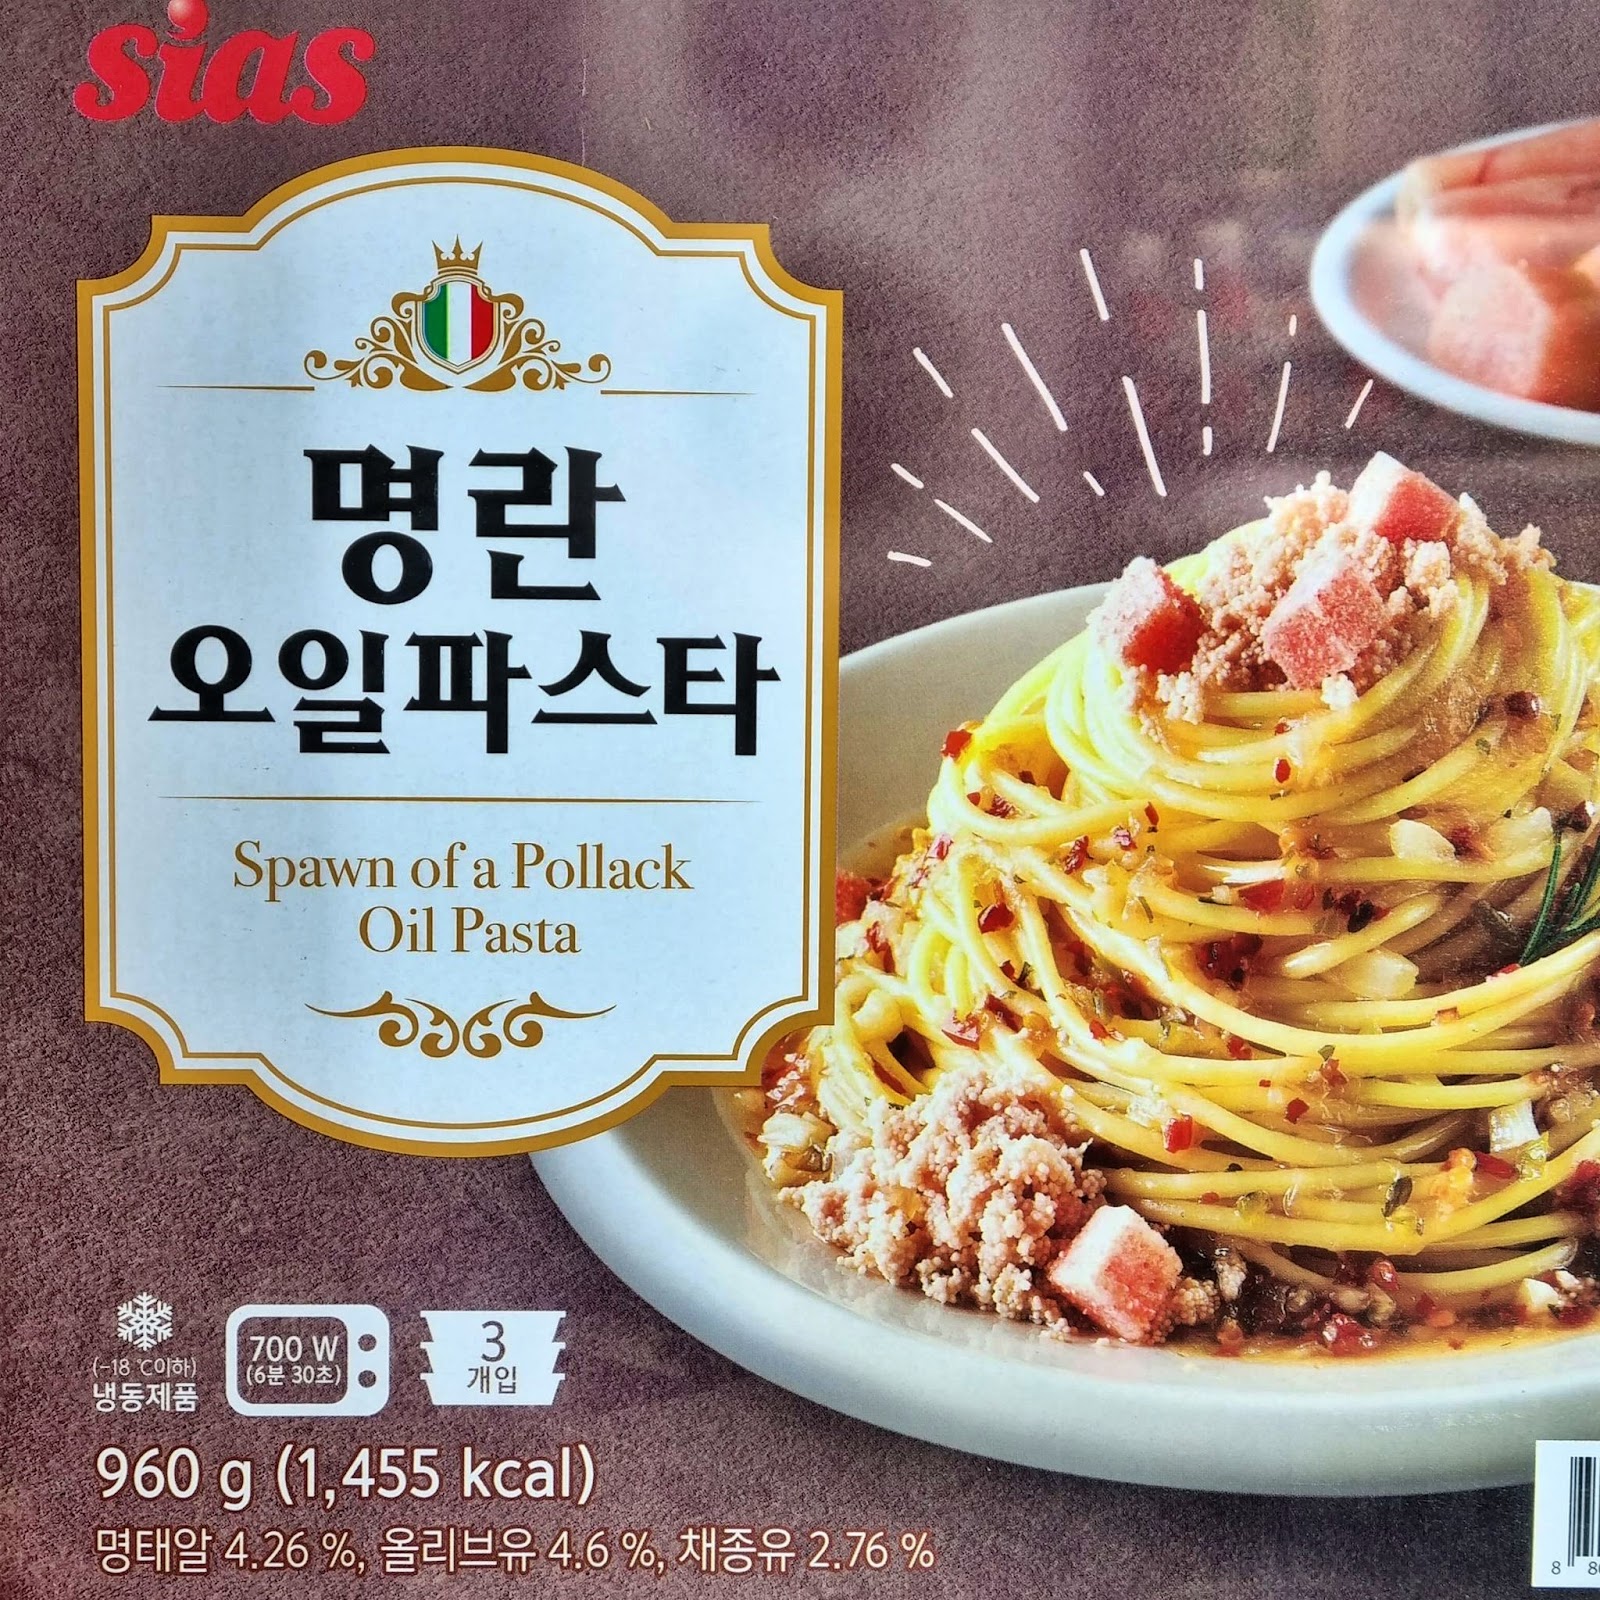 Korean packaging the microwave pasta containing the phrase Spawn of a Pollack